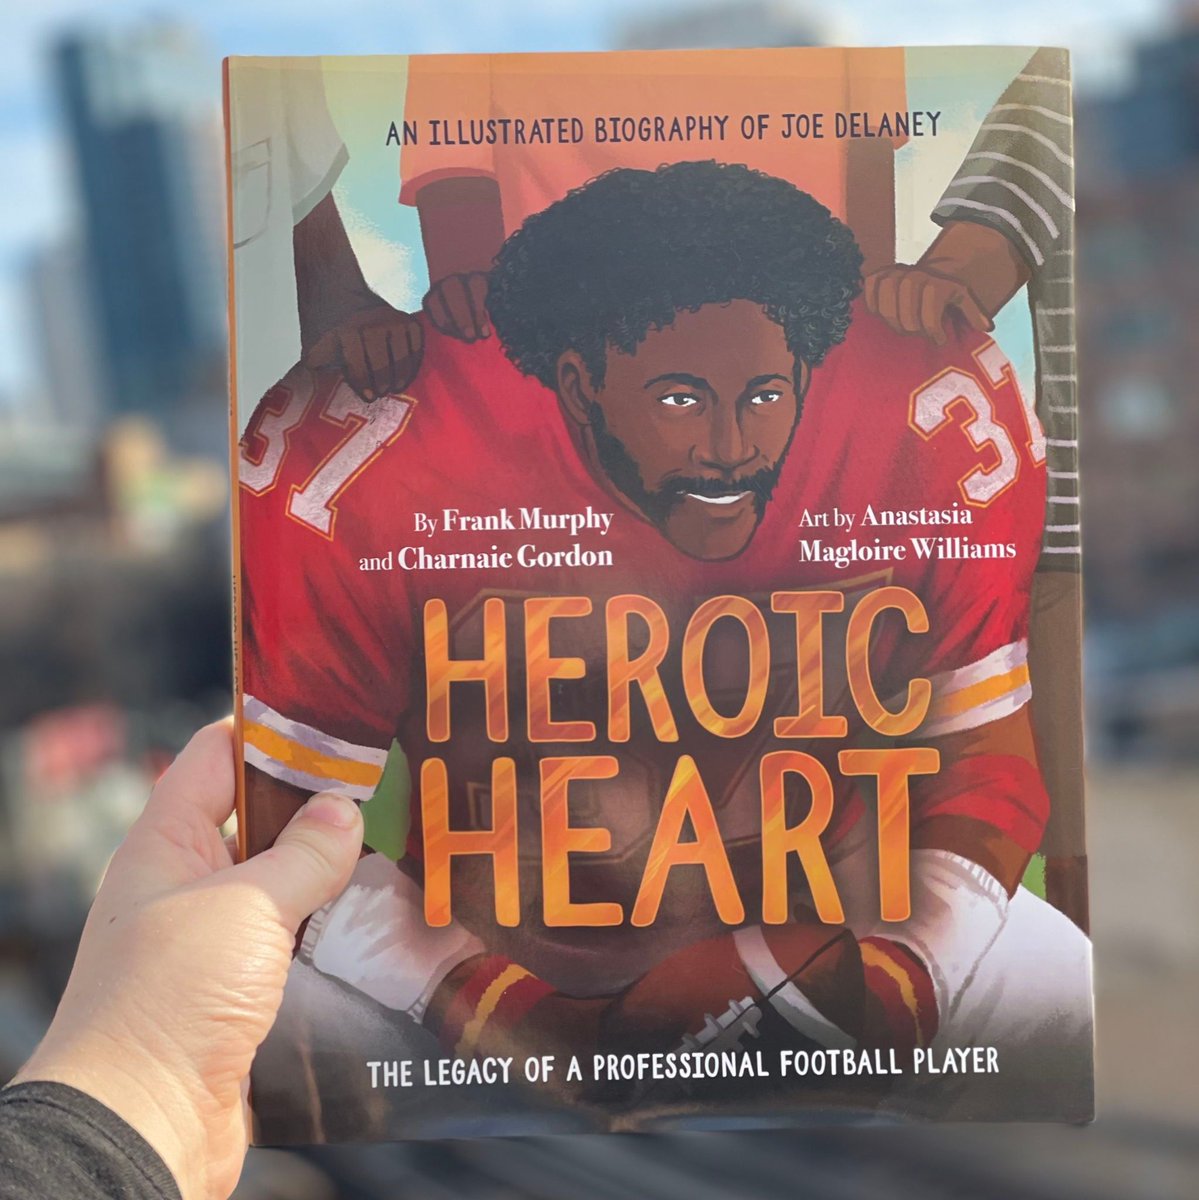 Happy Book Birthday! Learn about the remarkable life of football player Joe Delaney in 'Heroic Heart'! #nfl #chiefs #football #childrensbooks #currentlyreading